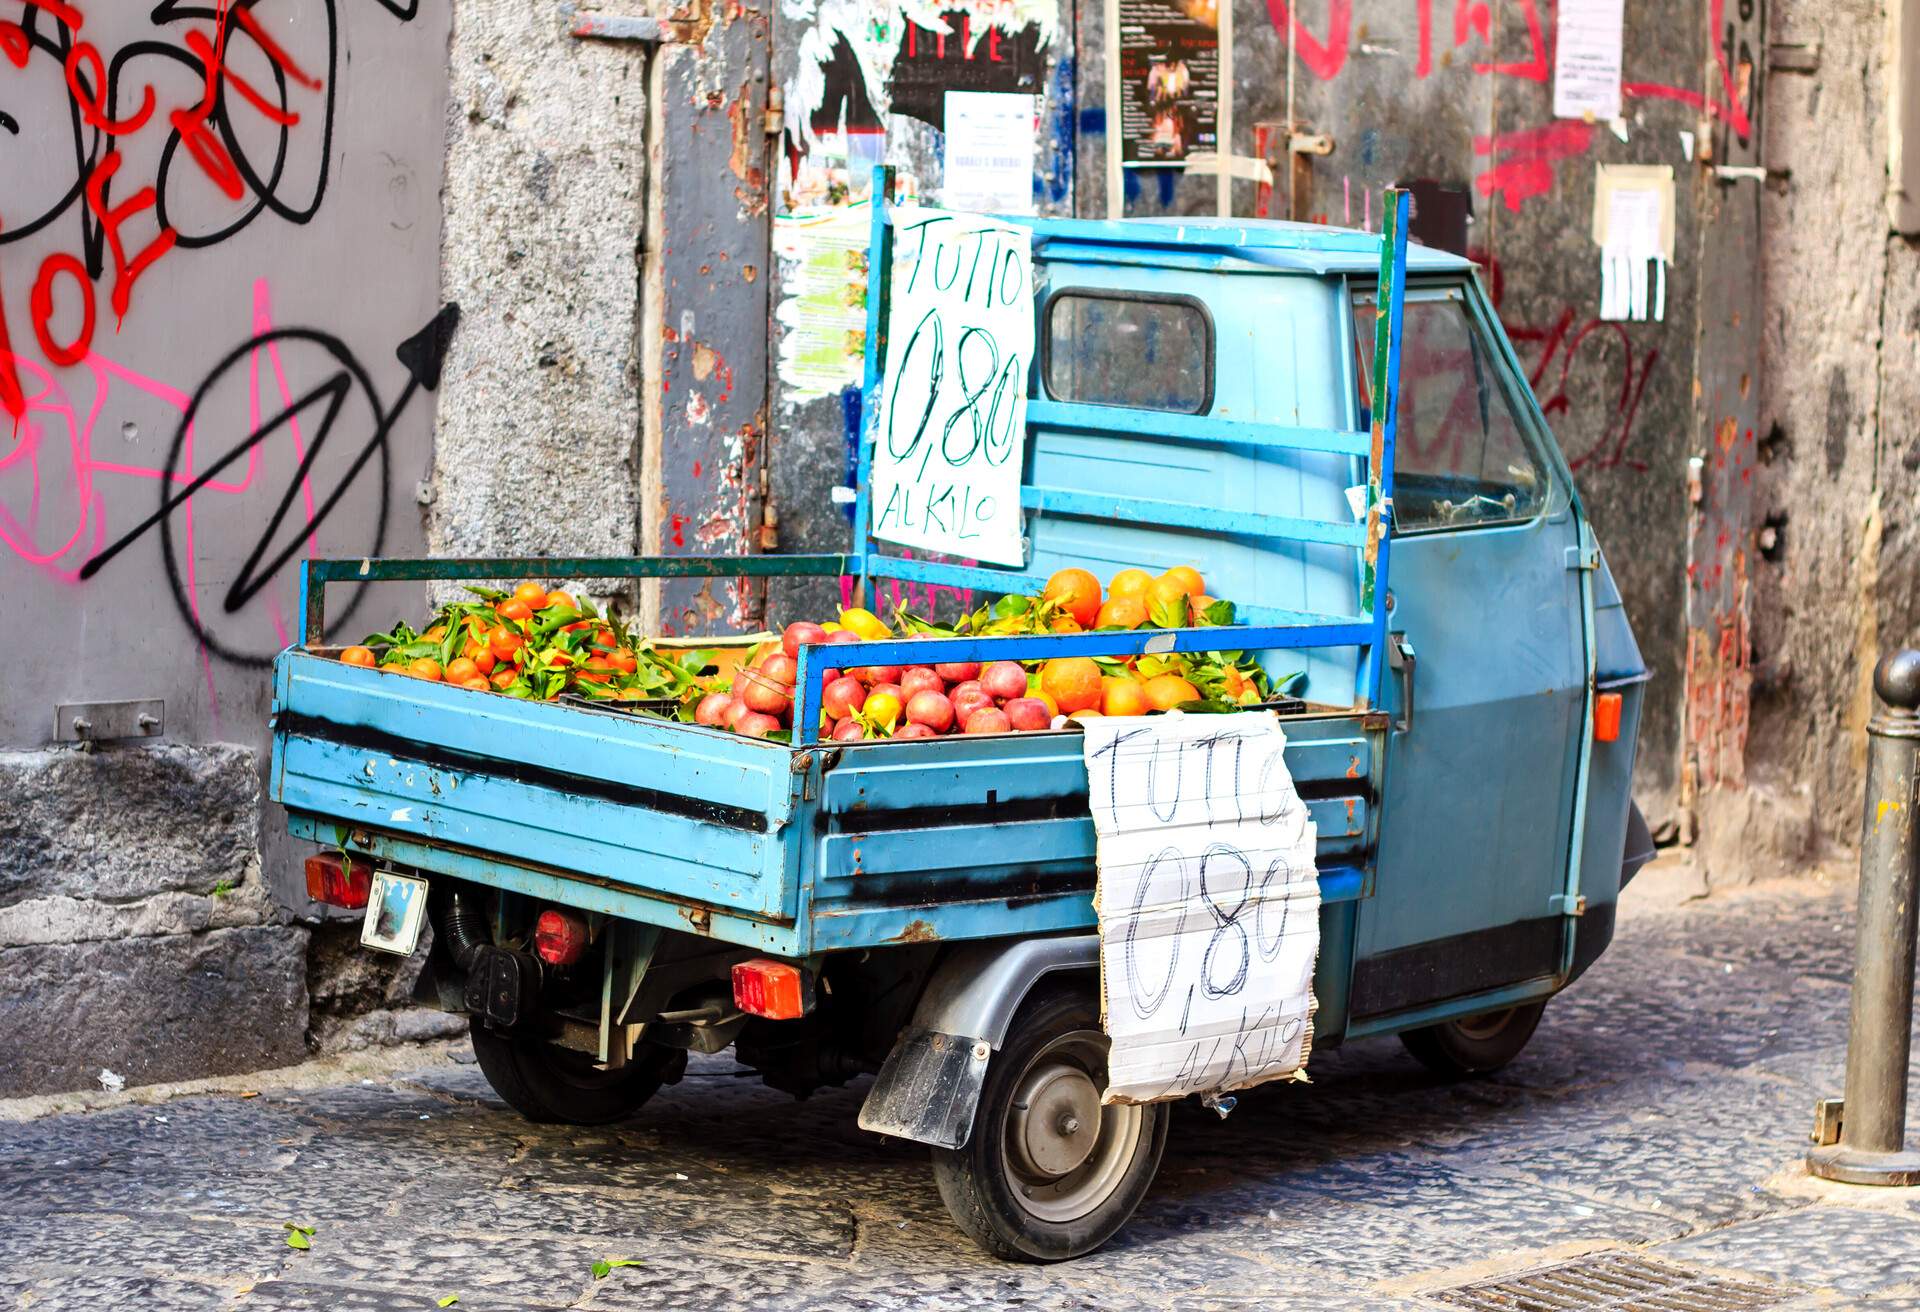 Fruits sold from the old blue mini-truck at the small street of Naples, Italy